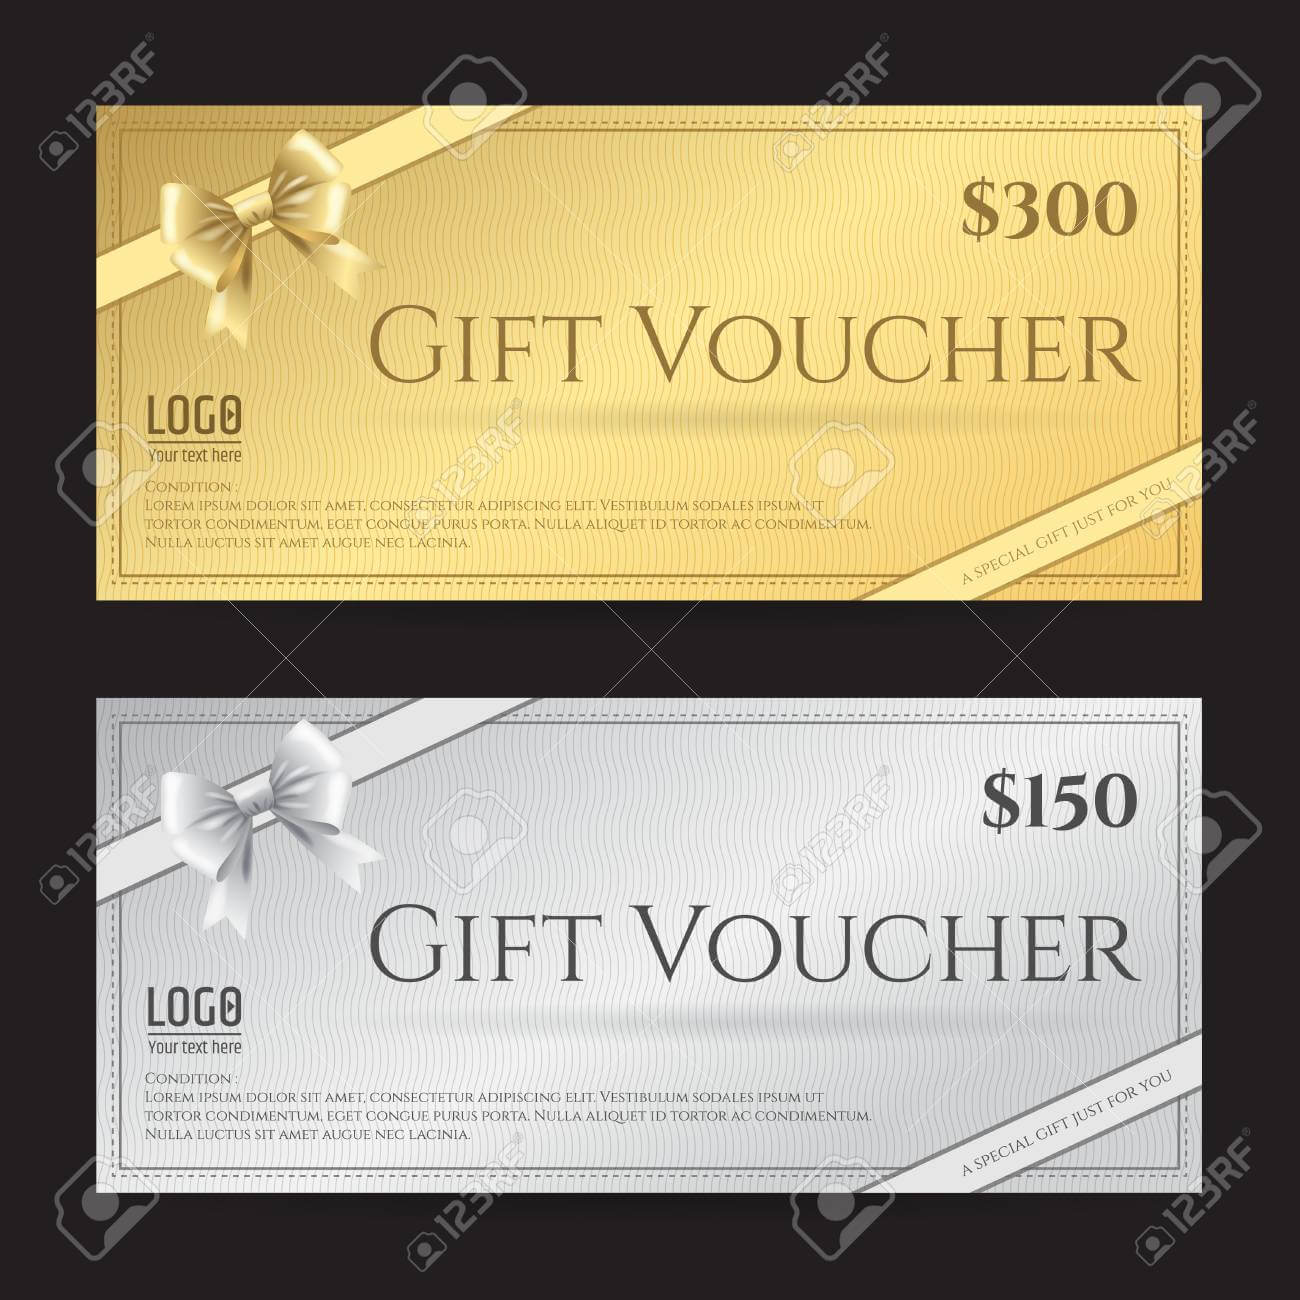 Elegant Gift Card Or Gift Voucher Template With Shiny Gold And.. Throughout Elegant Gift Certificate Template